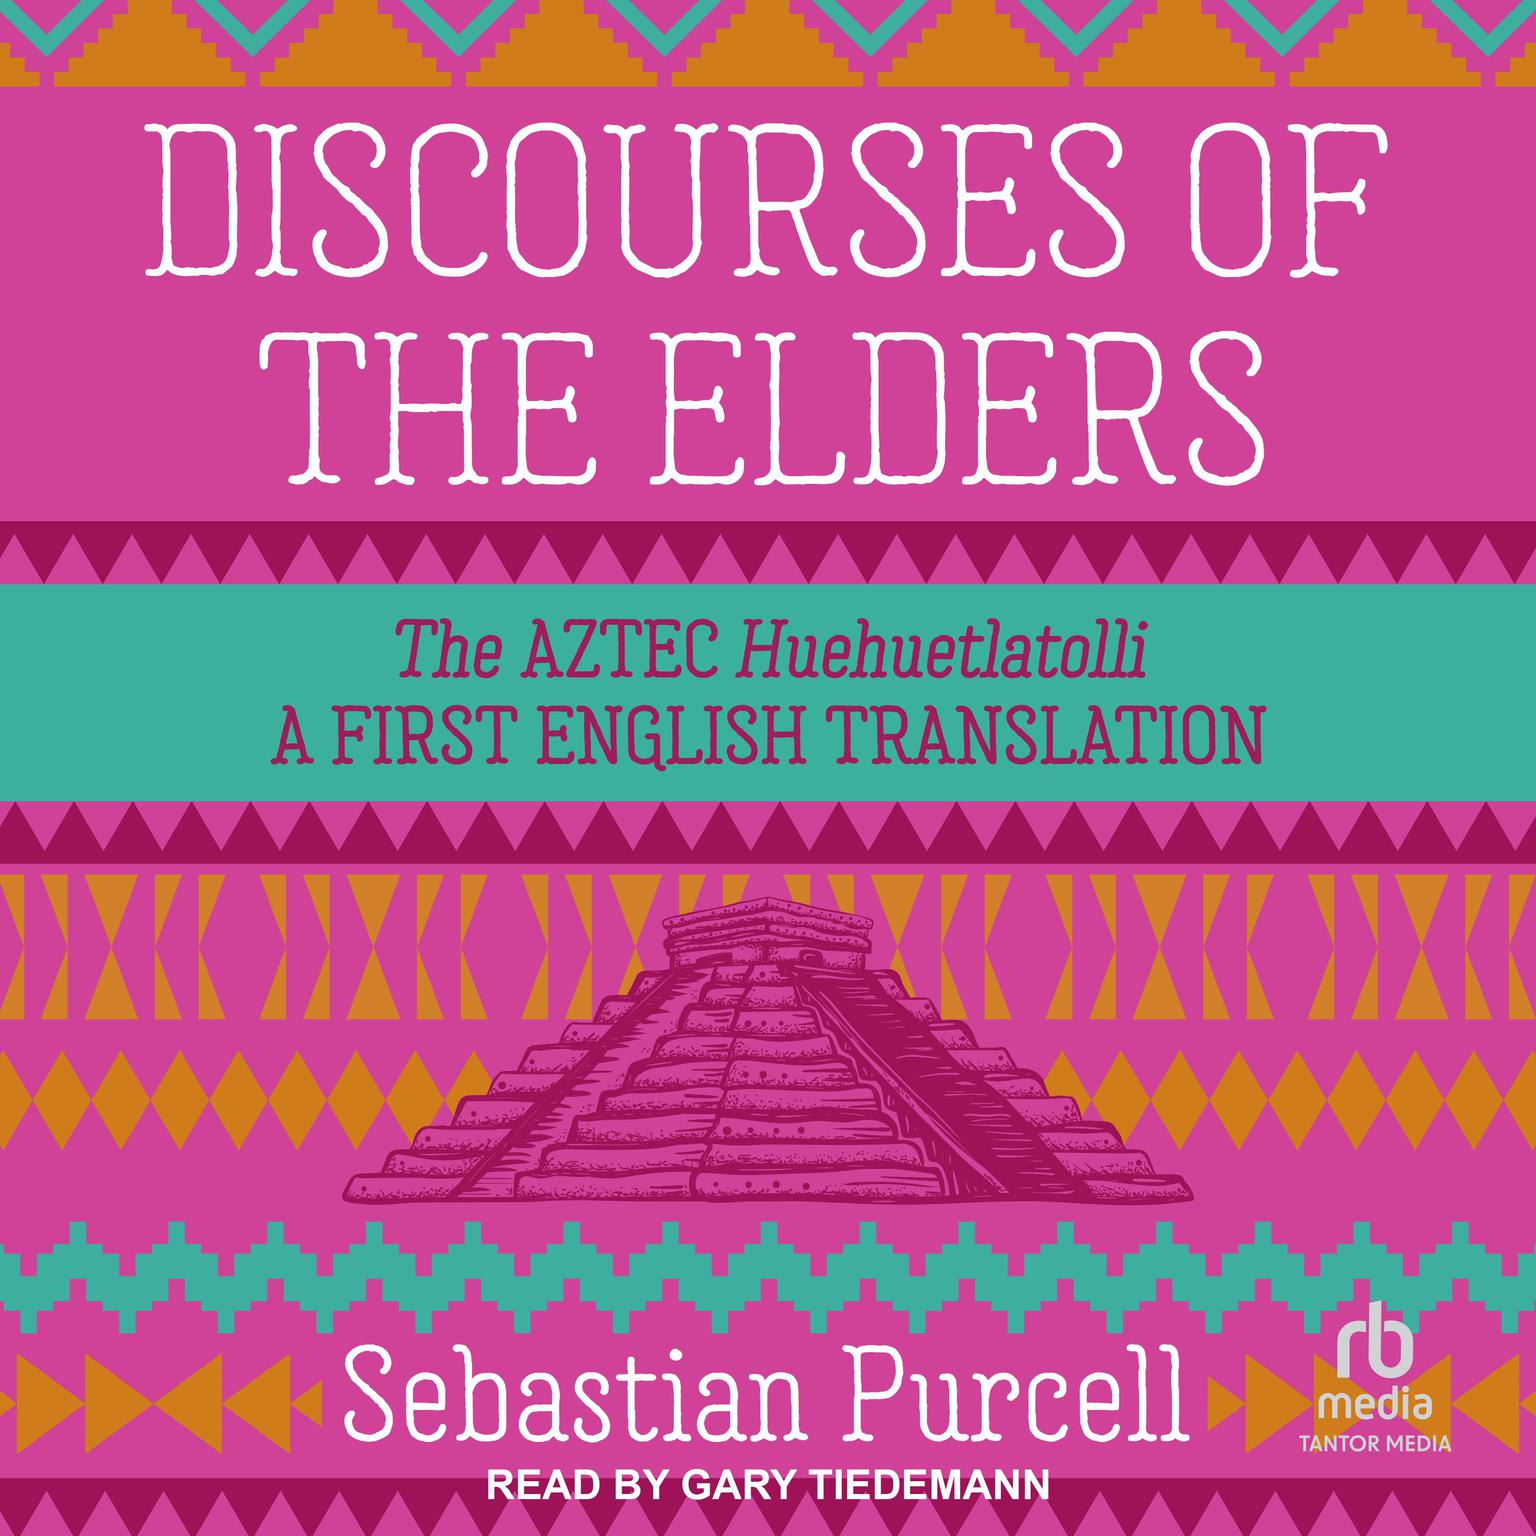 Discourses of the Elders: The Aztec Huehuetlatolli A First English Translation Audiobook, by Sebastian Purcell